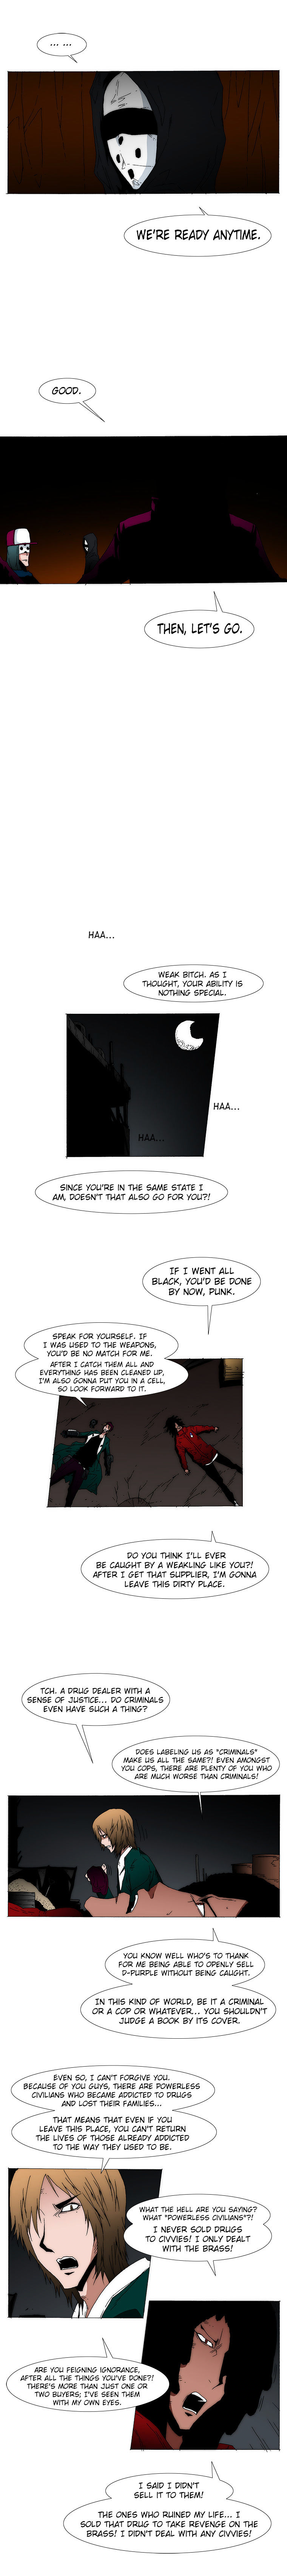 Trace 2.0 - Page 2